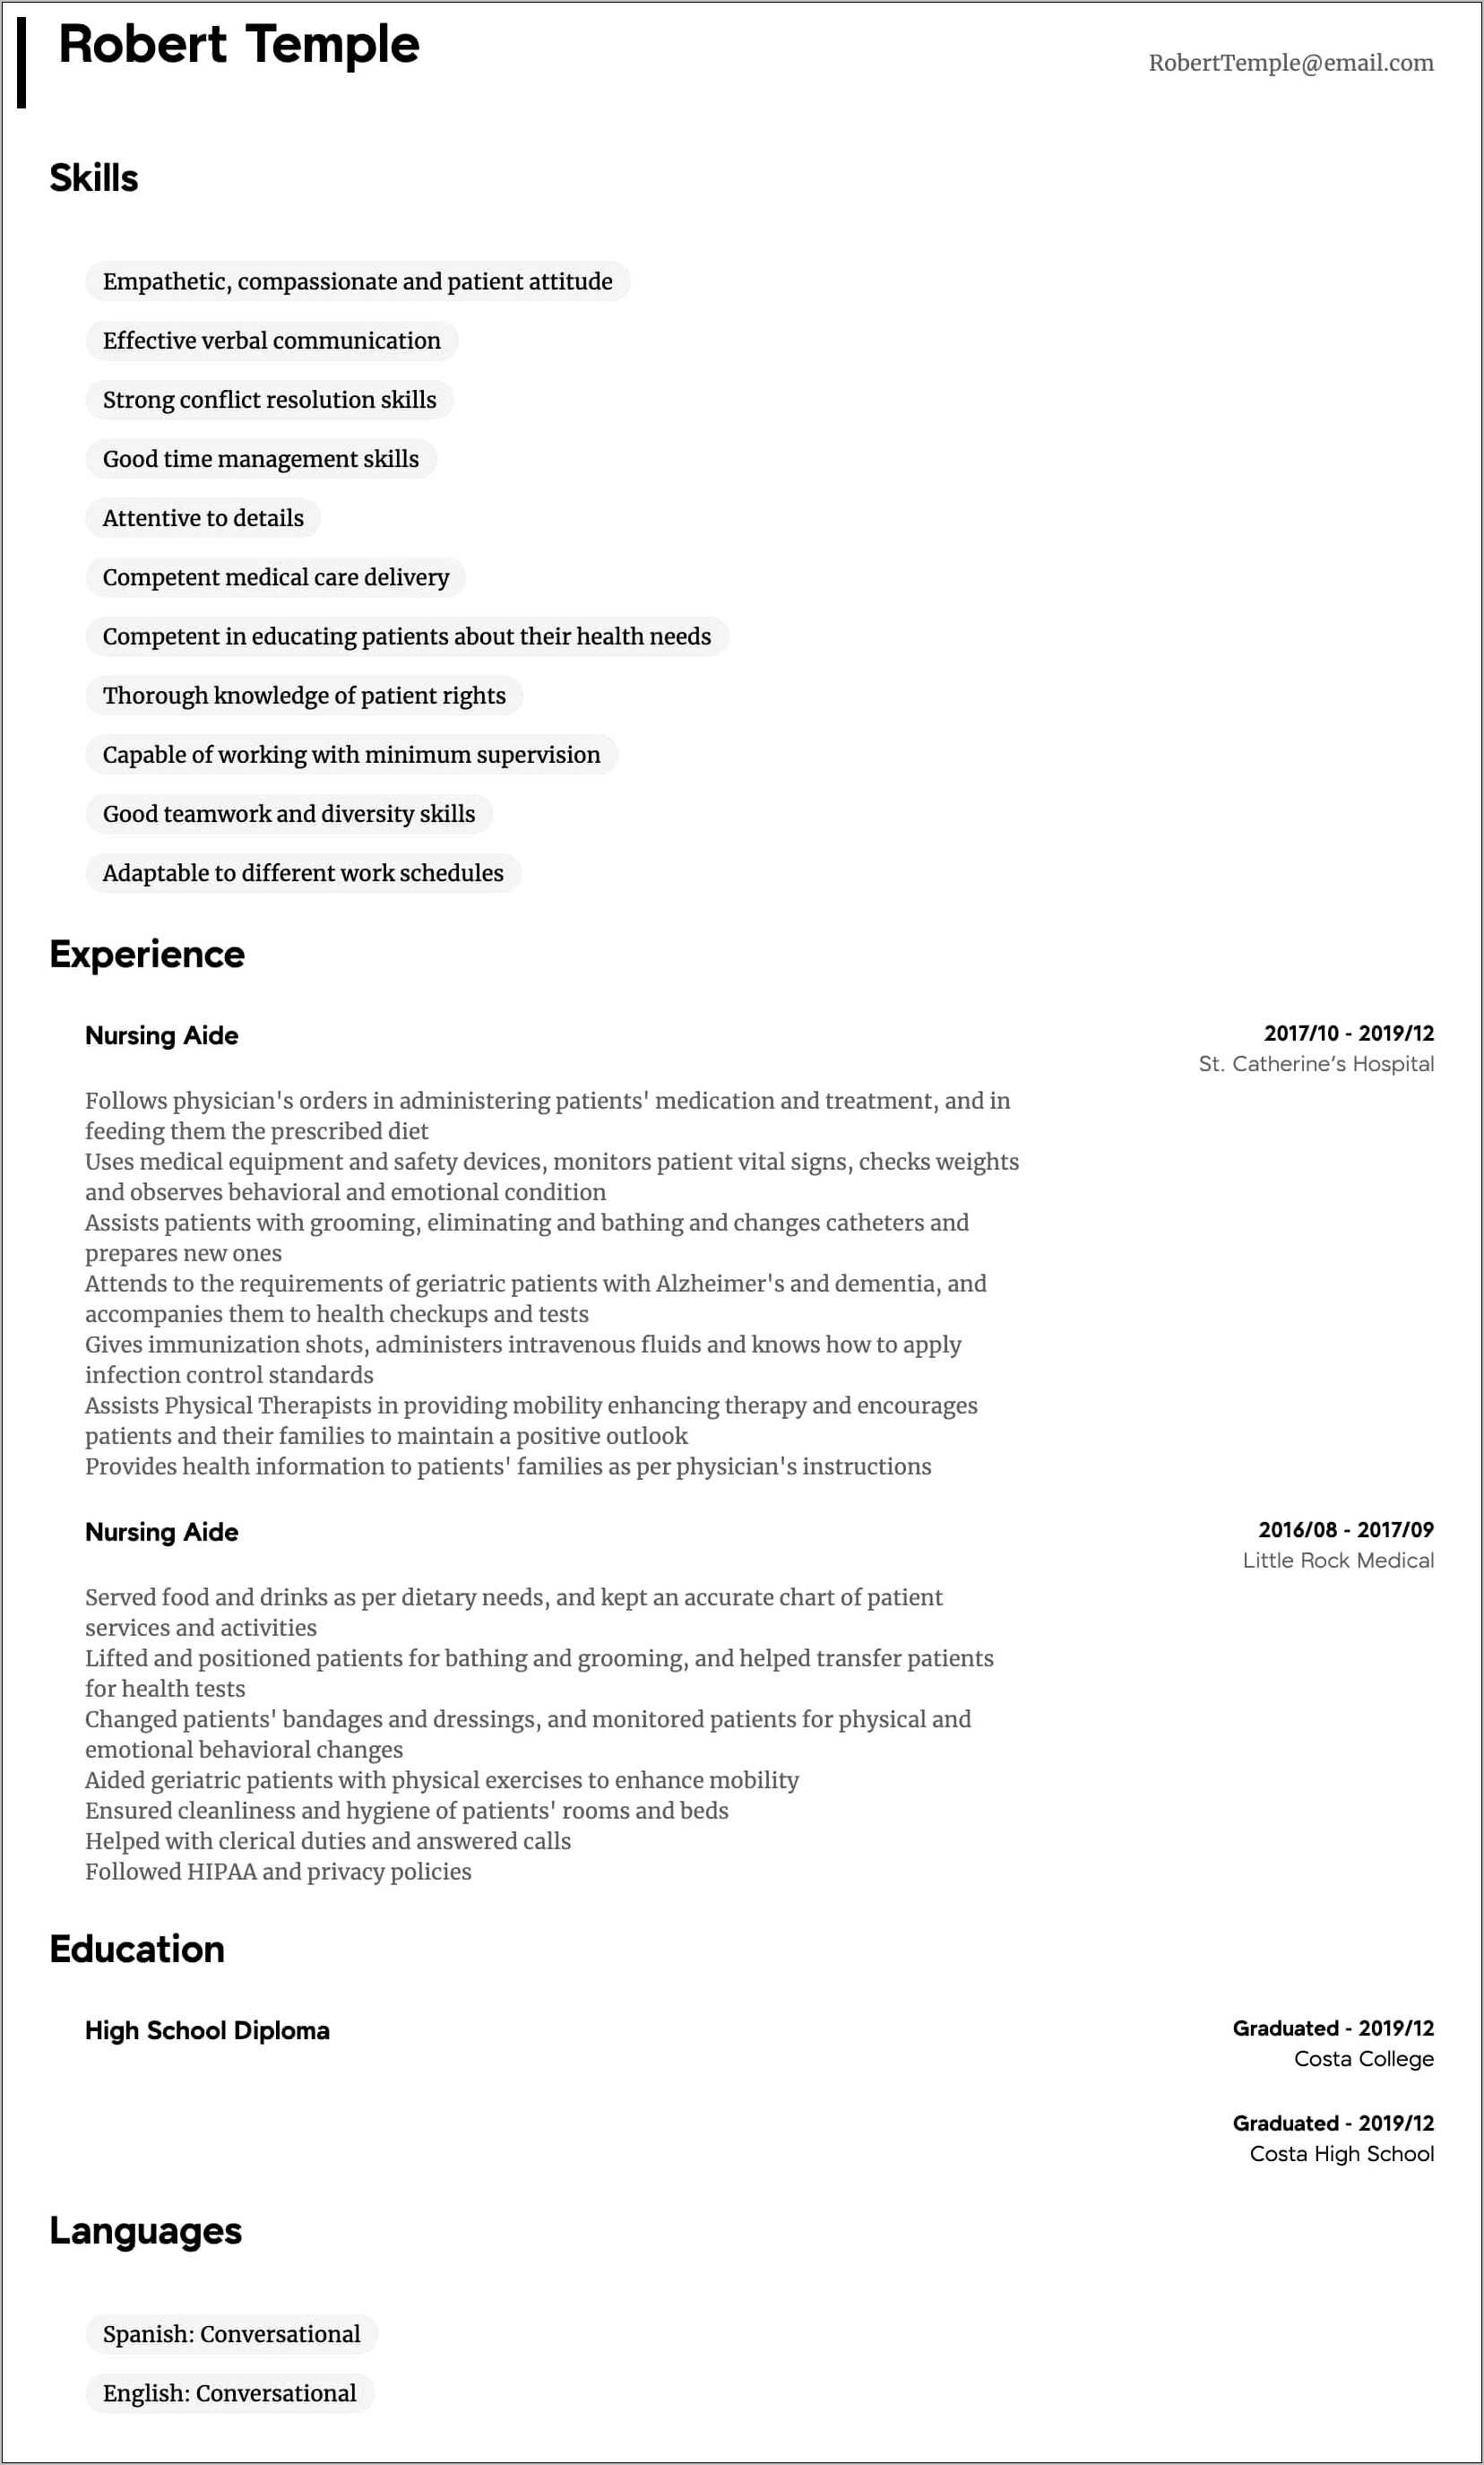 Special Skills For Nursing Assistant Resume - Resume Example Gallery